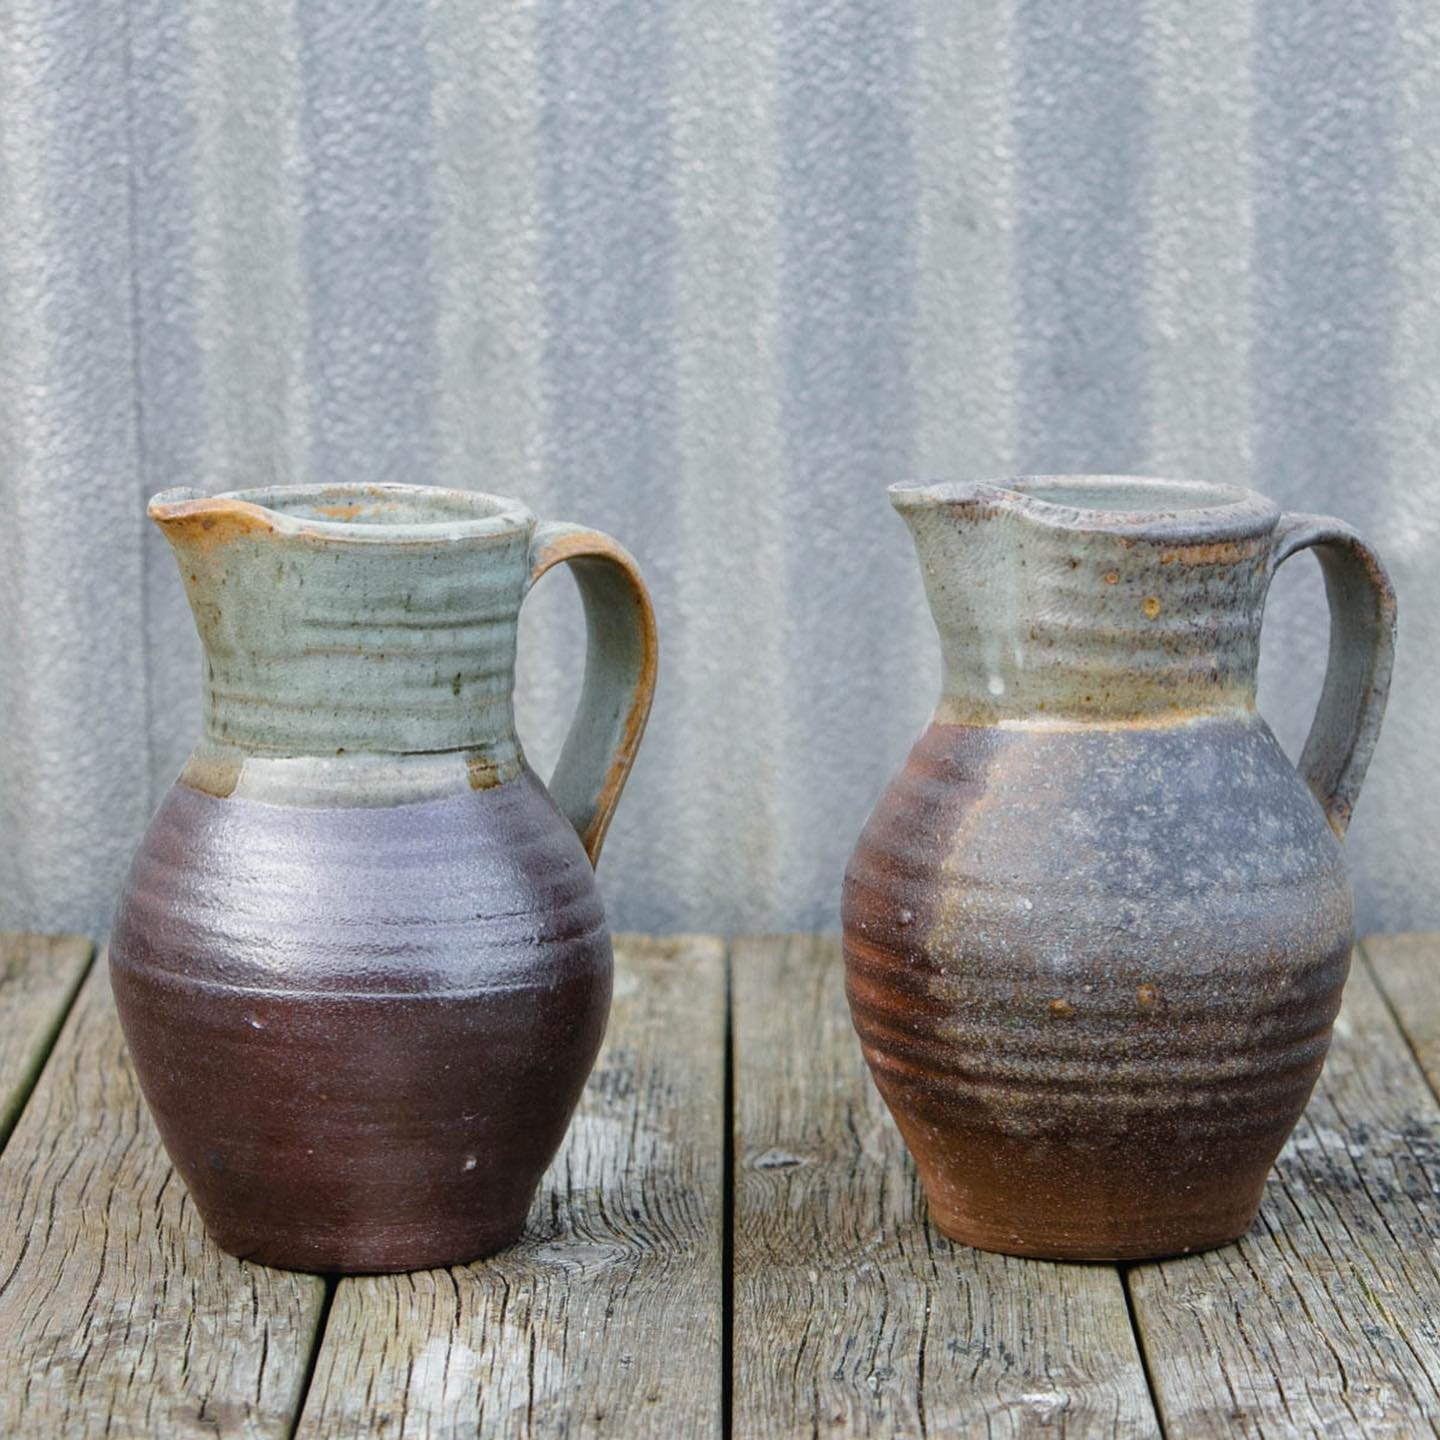 A few of the jugs from this years anagama firing at Myren g&aring;rd. We had some really great results this year, but so much more to learn. Looking forward to next year&rsquo;s one. Stop by the shop (@hvistendahlkeramikk) in Farsund for a closer loo